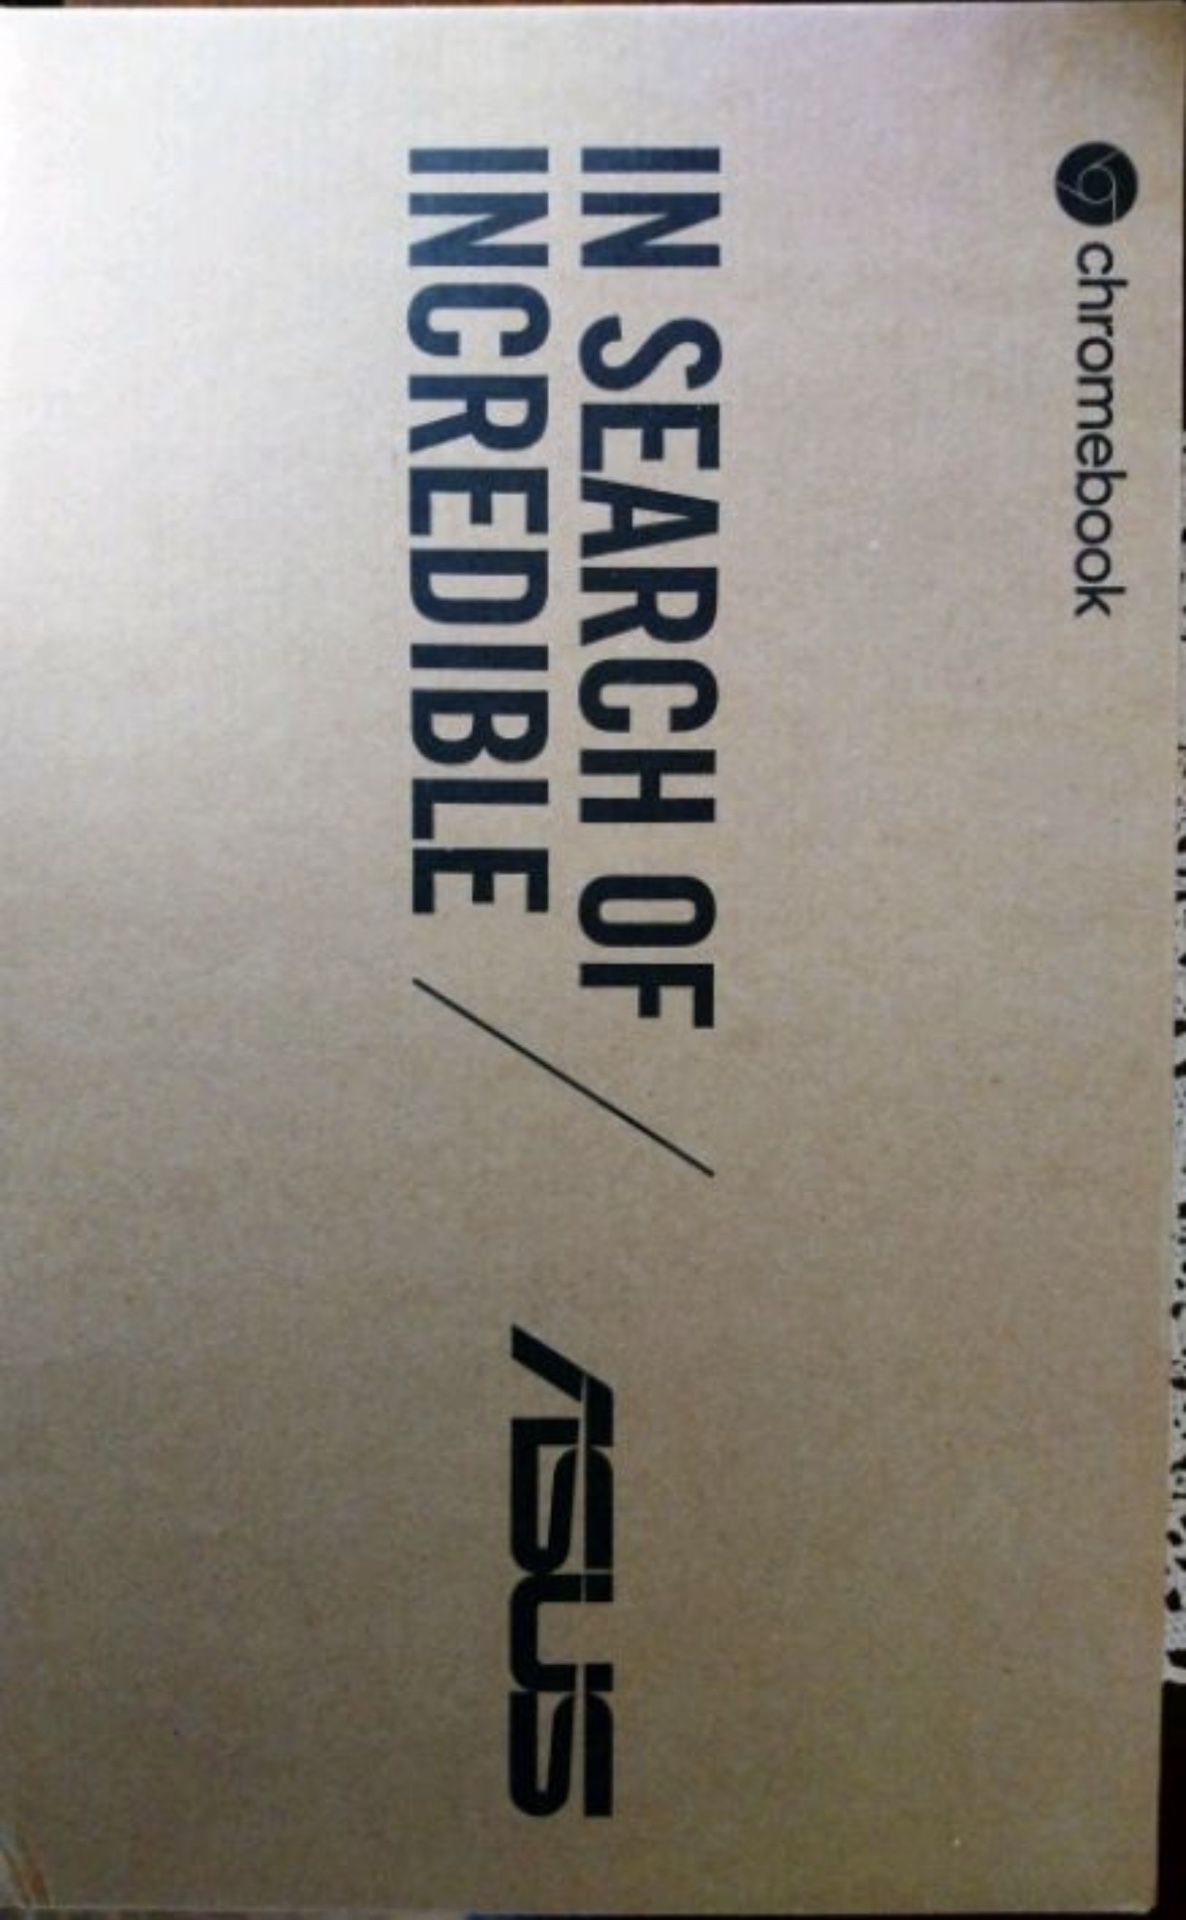 Brand new Asus in box.